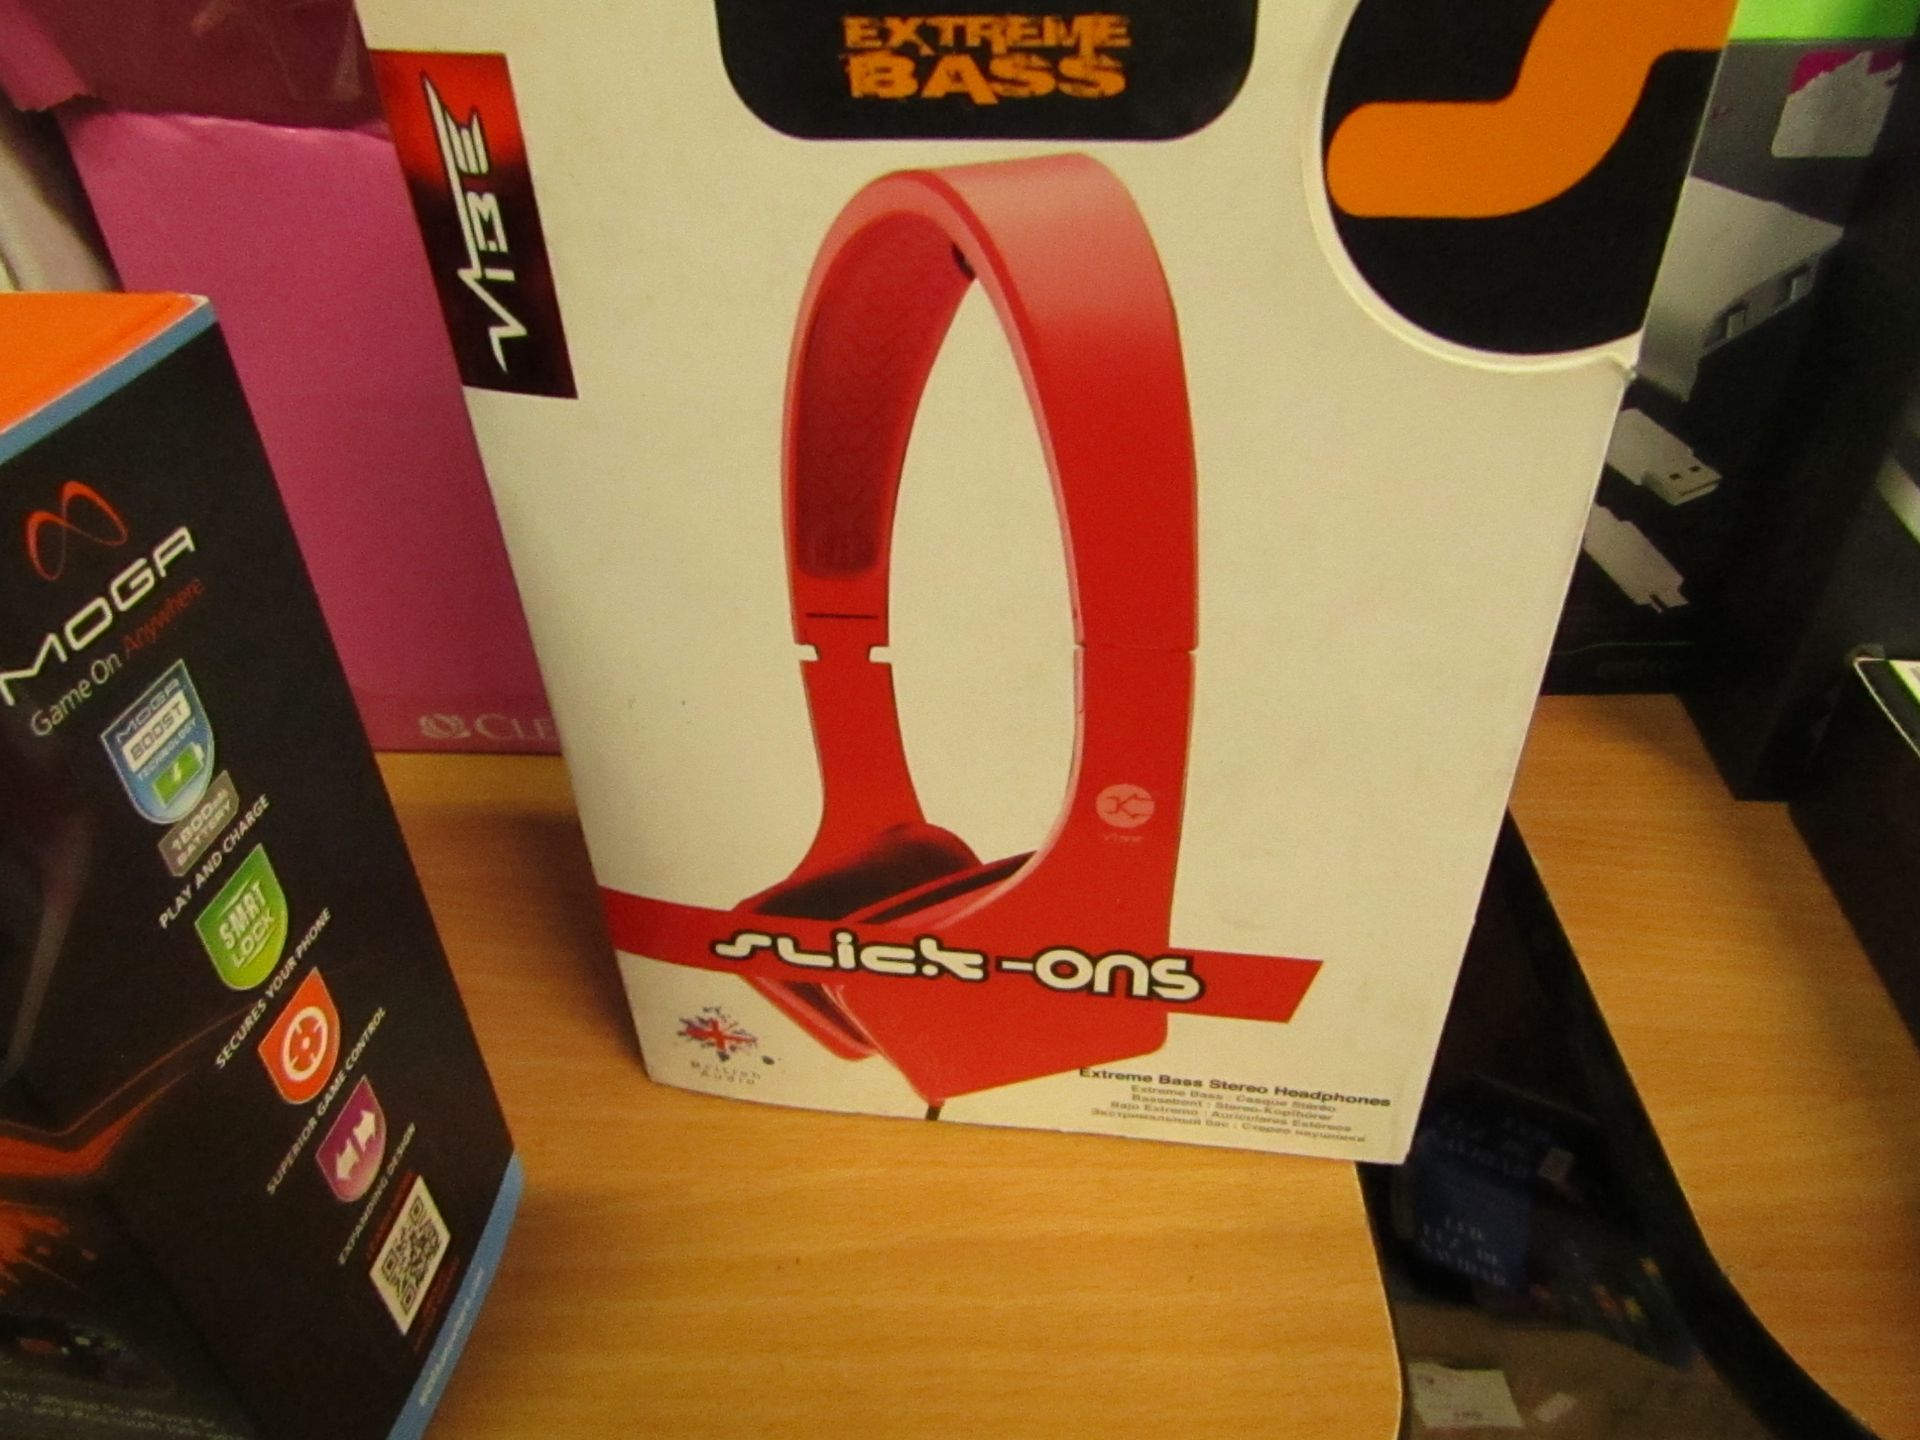 Vibe Slick ons Extreme Bass headphones. Boxed